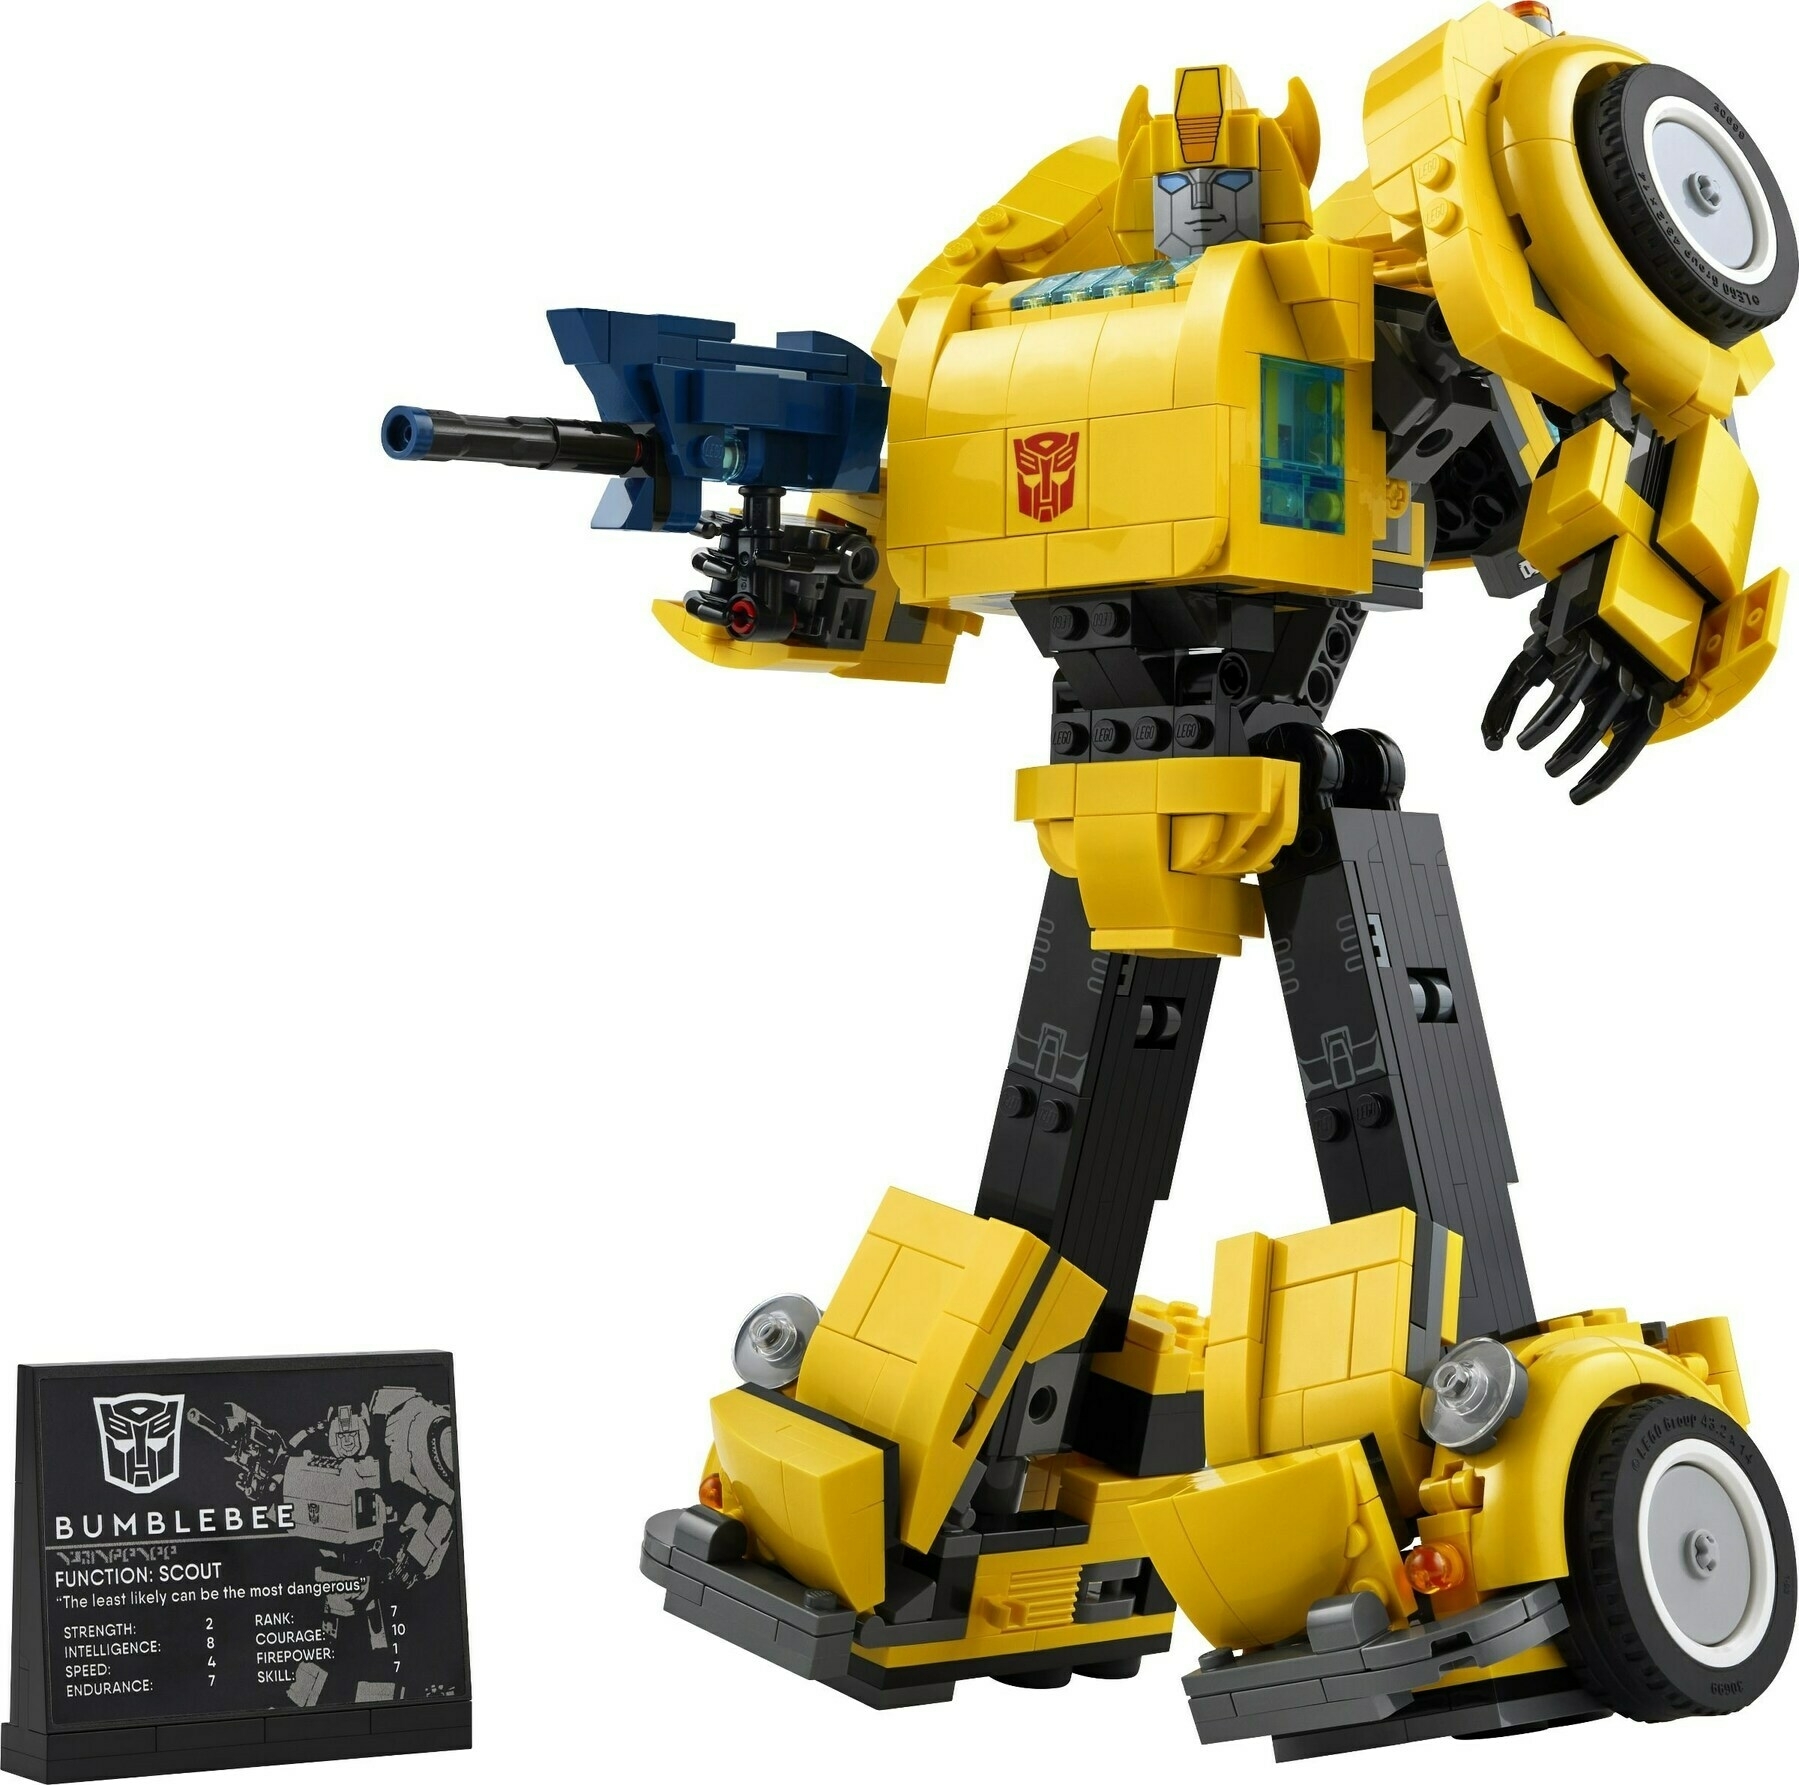 A fully built LEGO model of Bumblebee from Transformers.